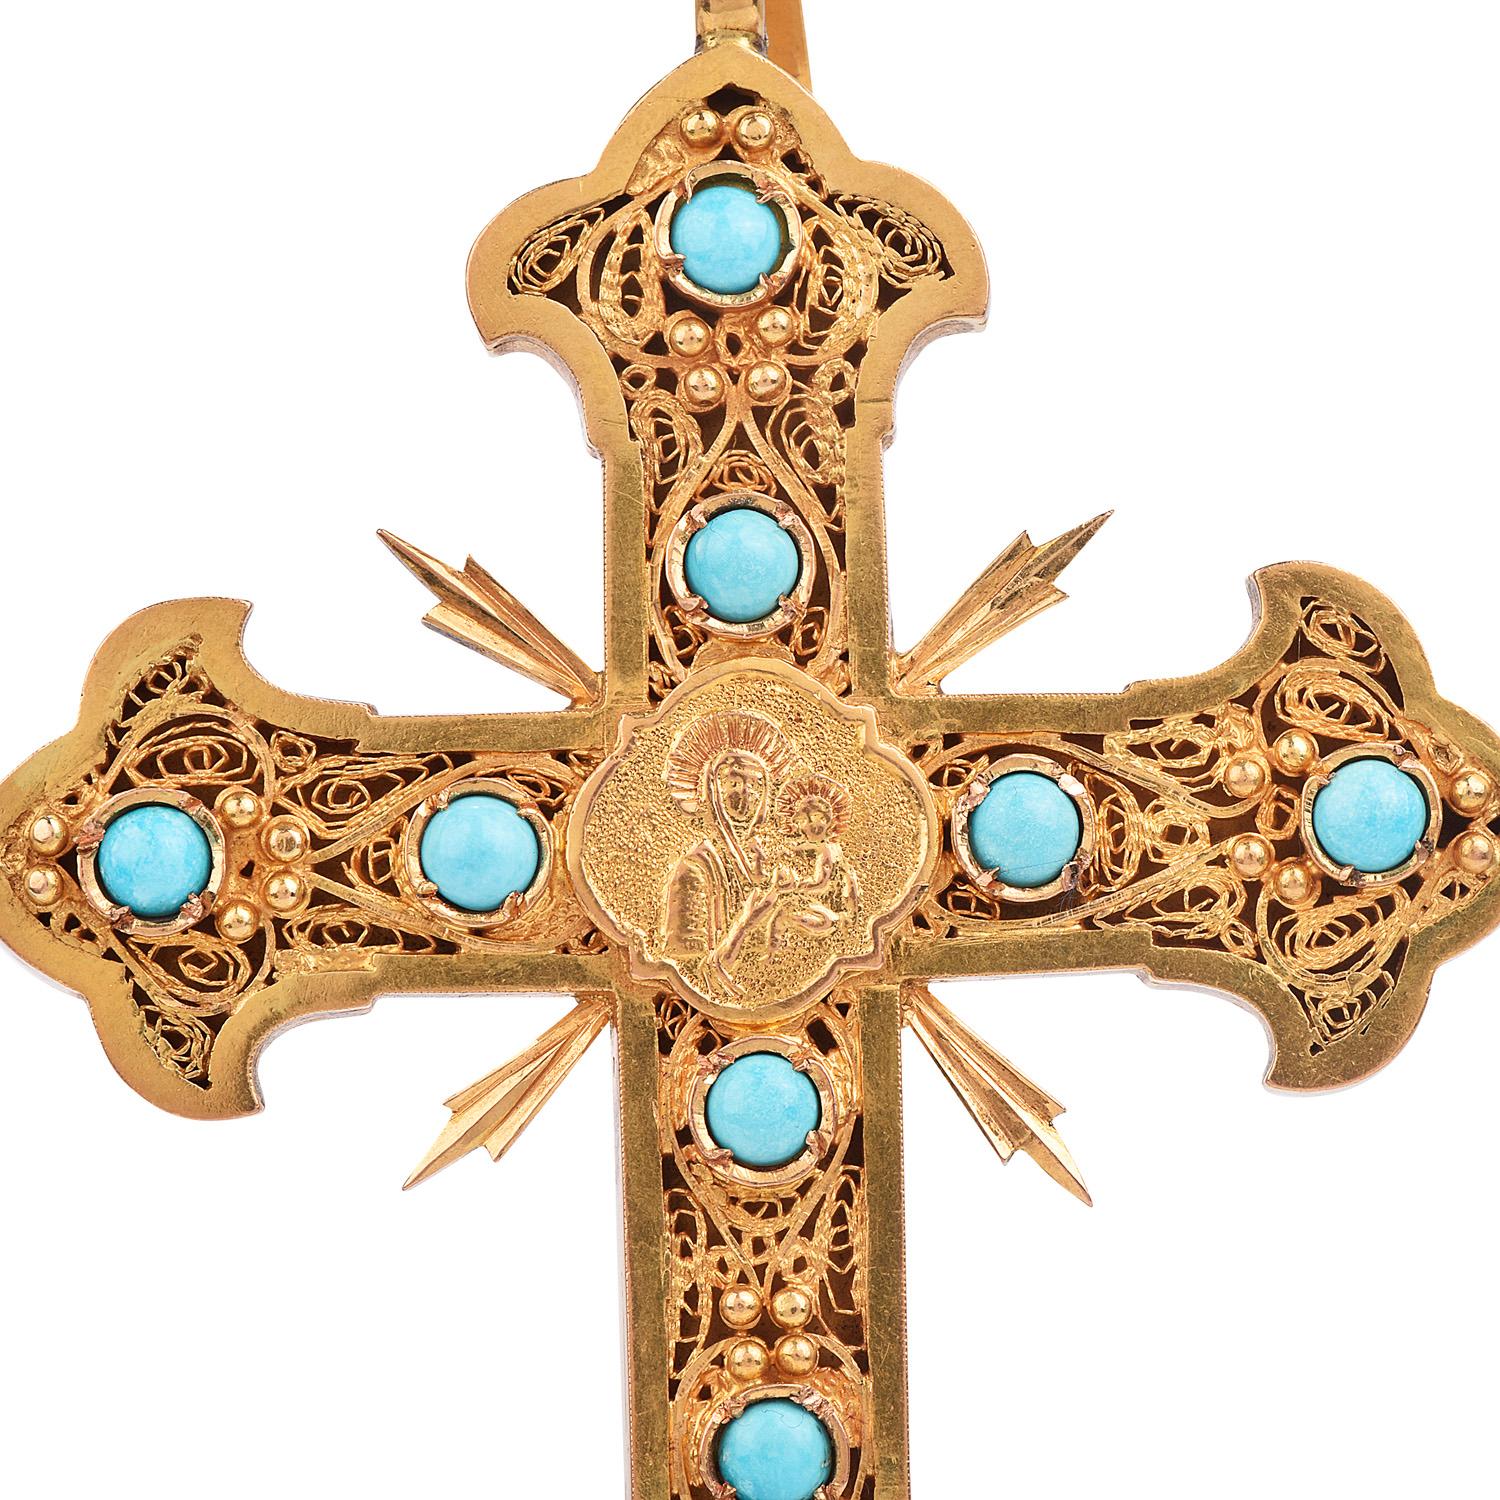 Antique Unique Turquoise 22K Gold Fleur de Lis Large Cross Pendant 

Expertly handcrafted in 22K Yellow gold and highlighted by 10 cabochon round-cut Genuine Turquoise gemstones, bezel set with an approximate size of 5 mm

Featuring exquisitely